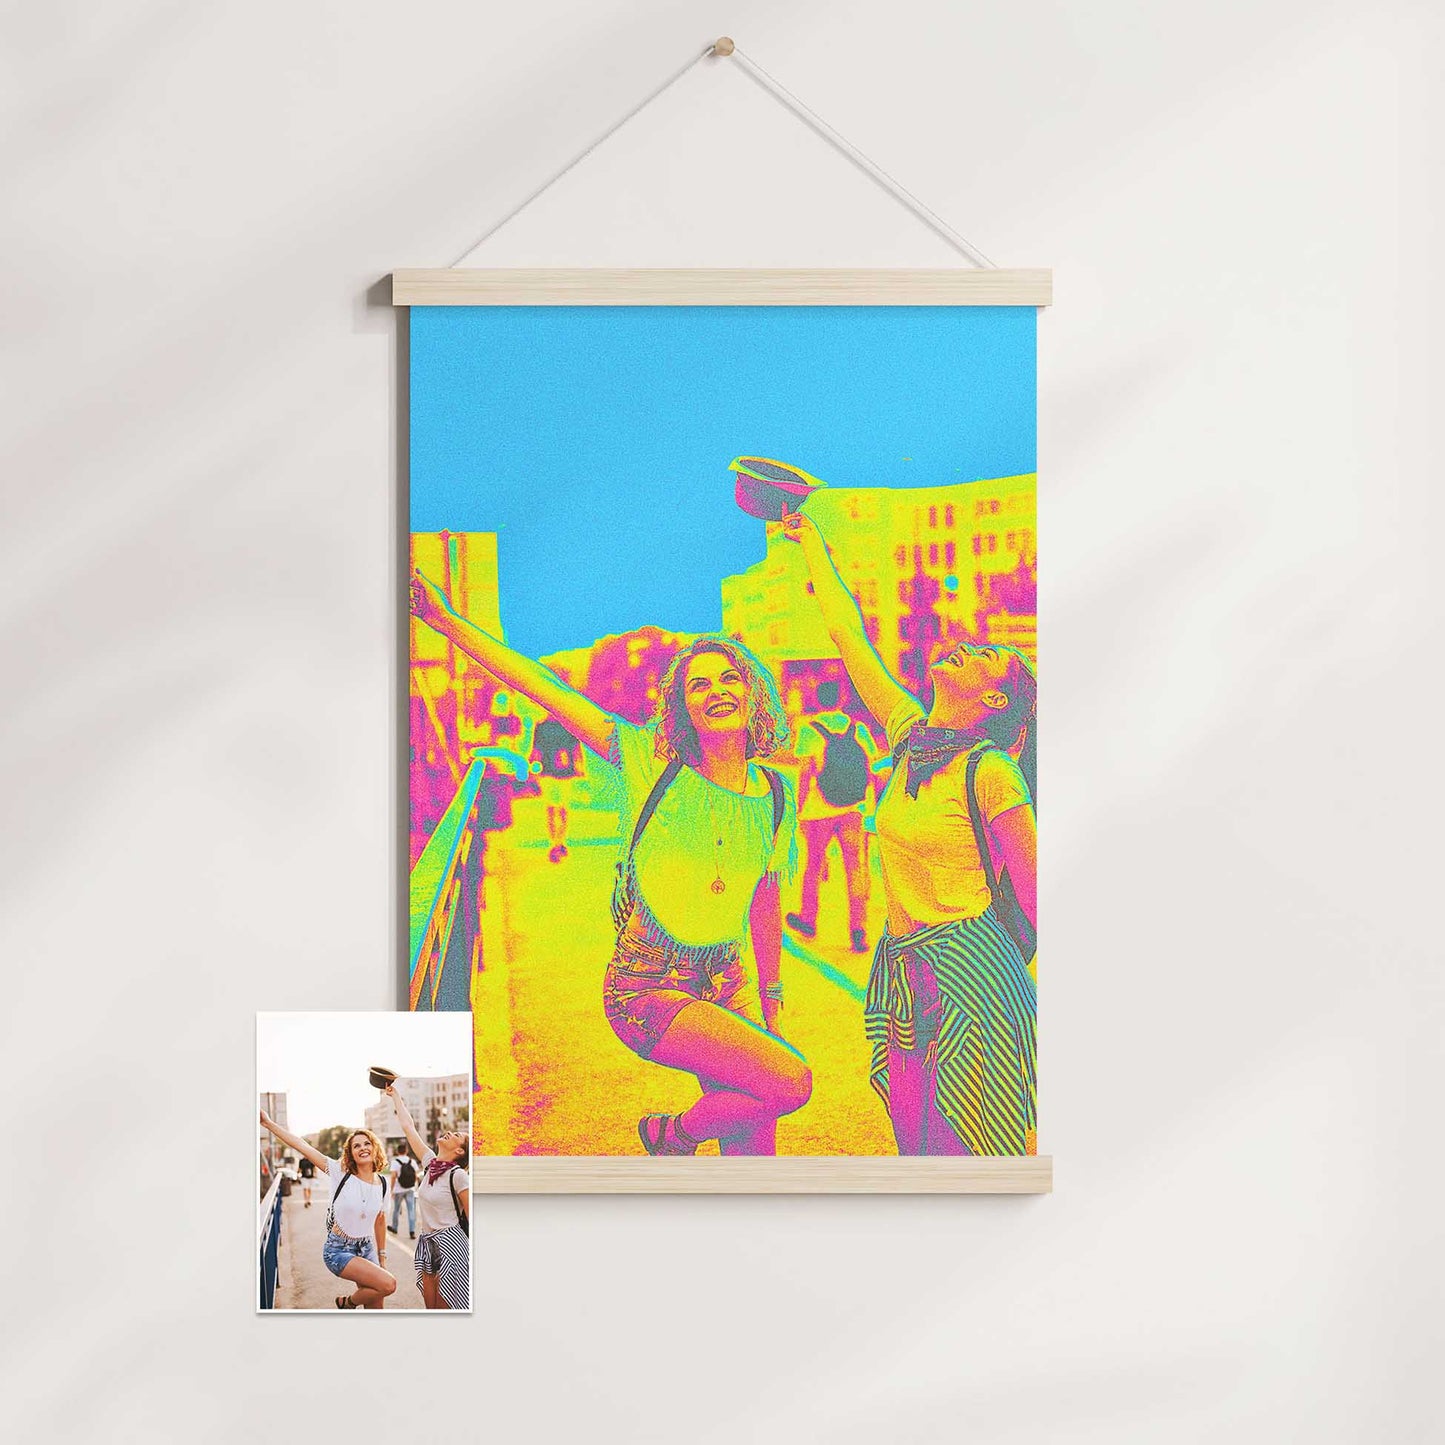 Turn your favorite photos into a captivating visual journey with our Personalised Acid Trip Poster Hanger. Featuring bold colors like blue, pink, green, and yellow, this trendy and vibrant wall art evokes sharp inspiration and creativity.